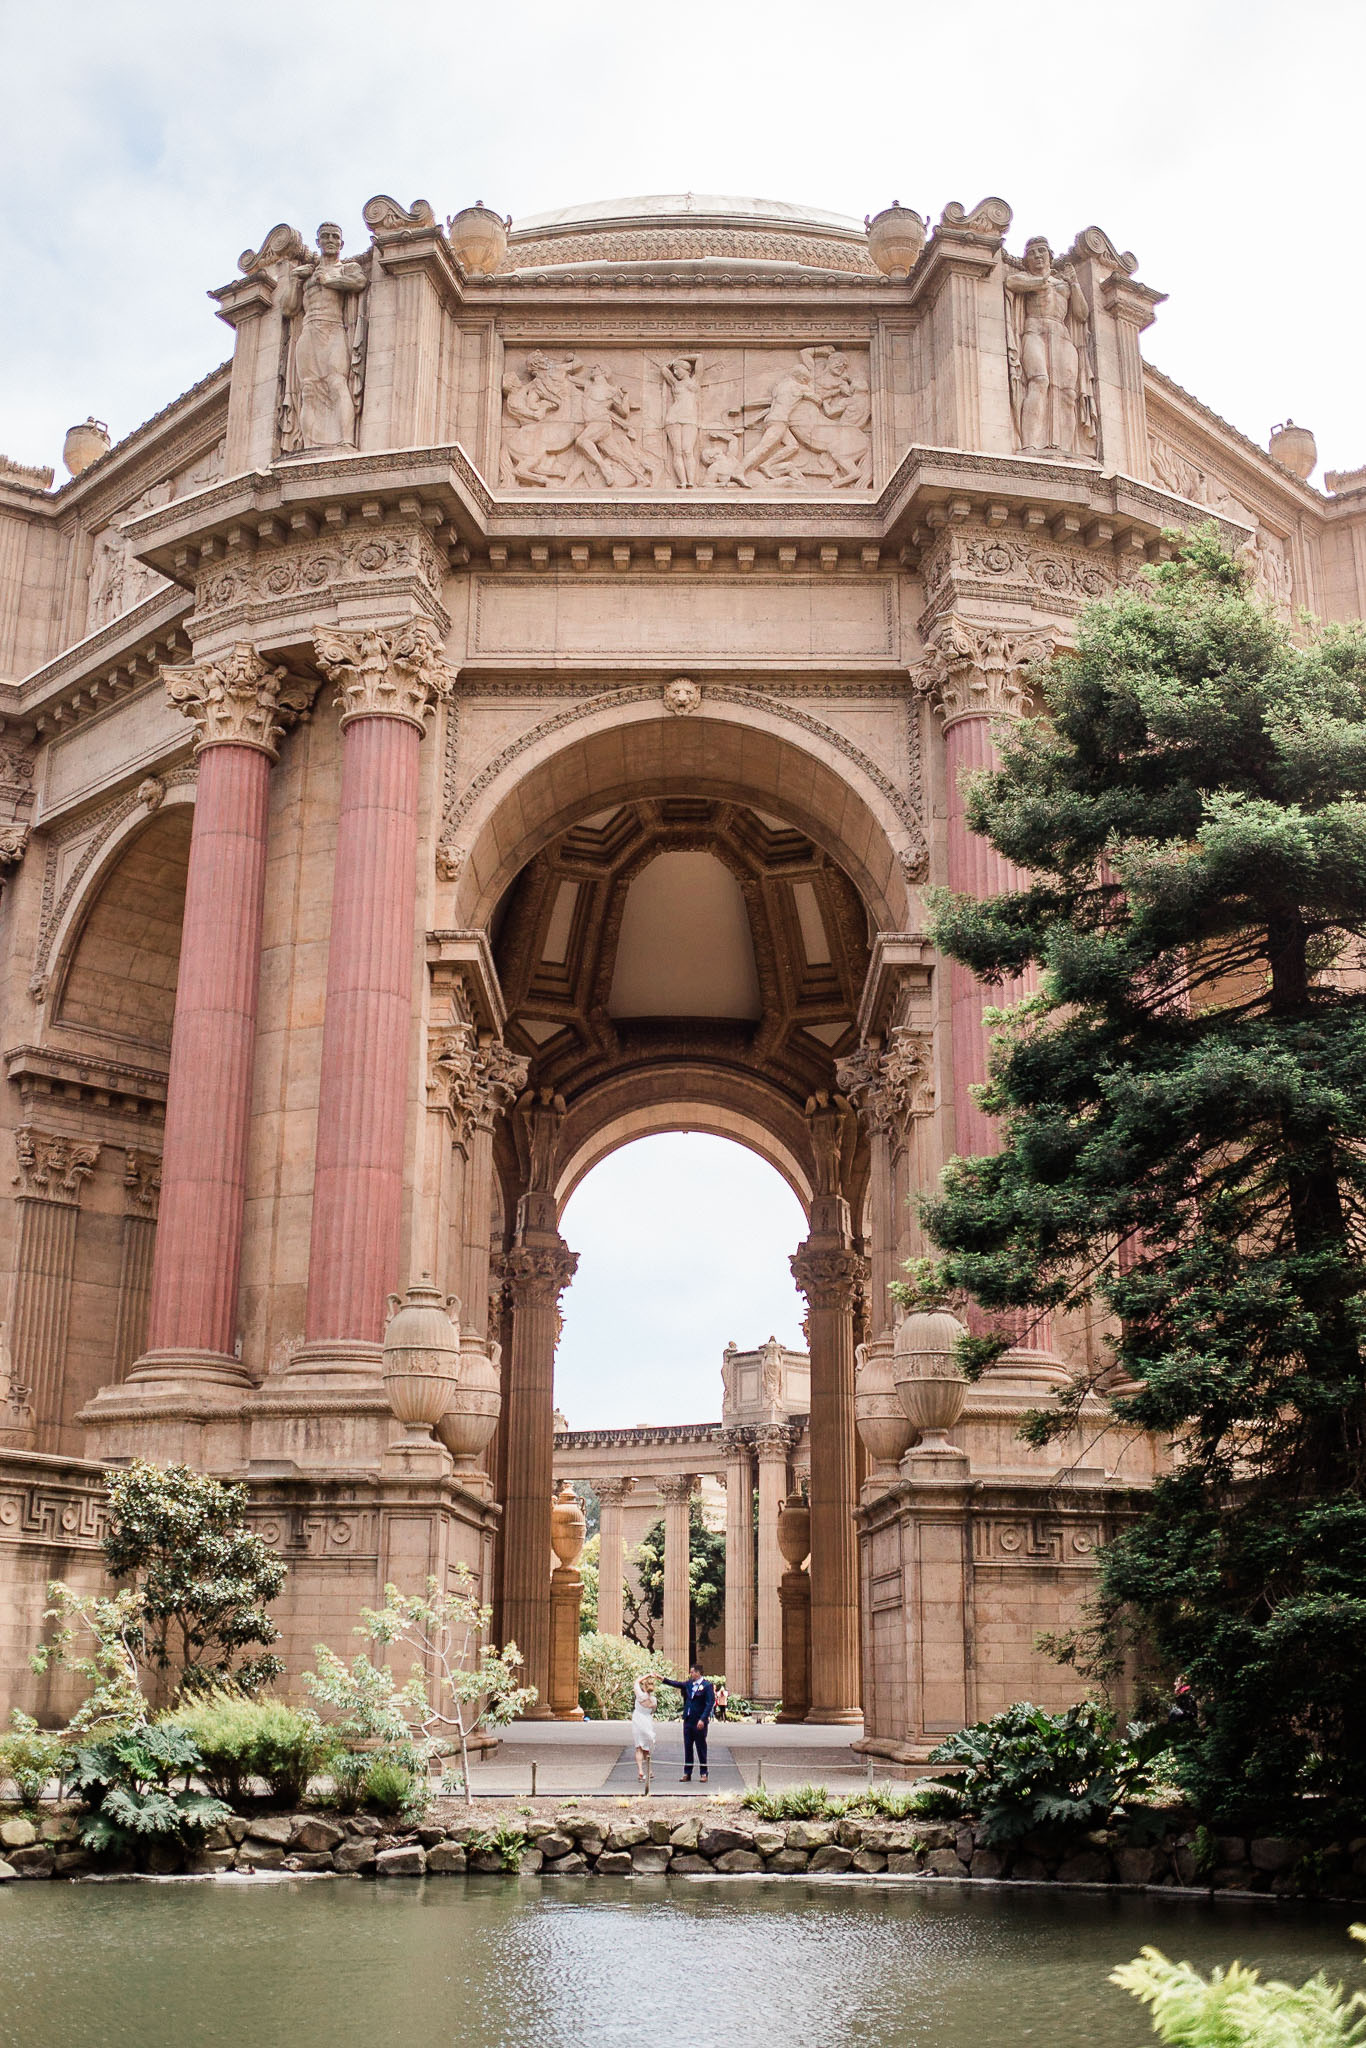 Bride and Groom pose for wedding photos near the Palace of Fine arts in San Francisco